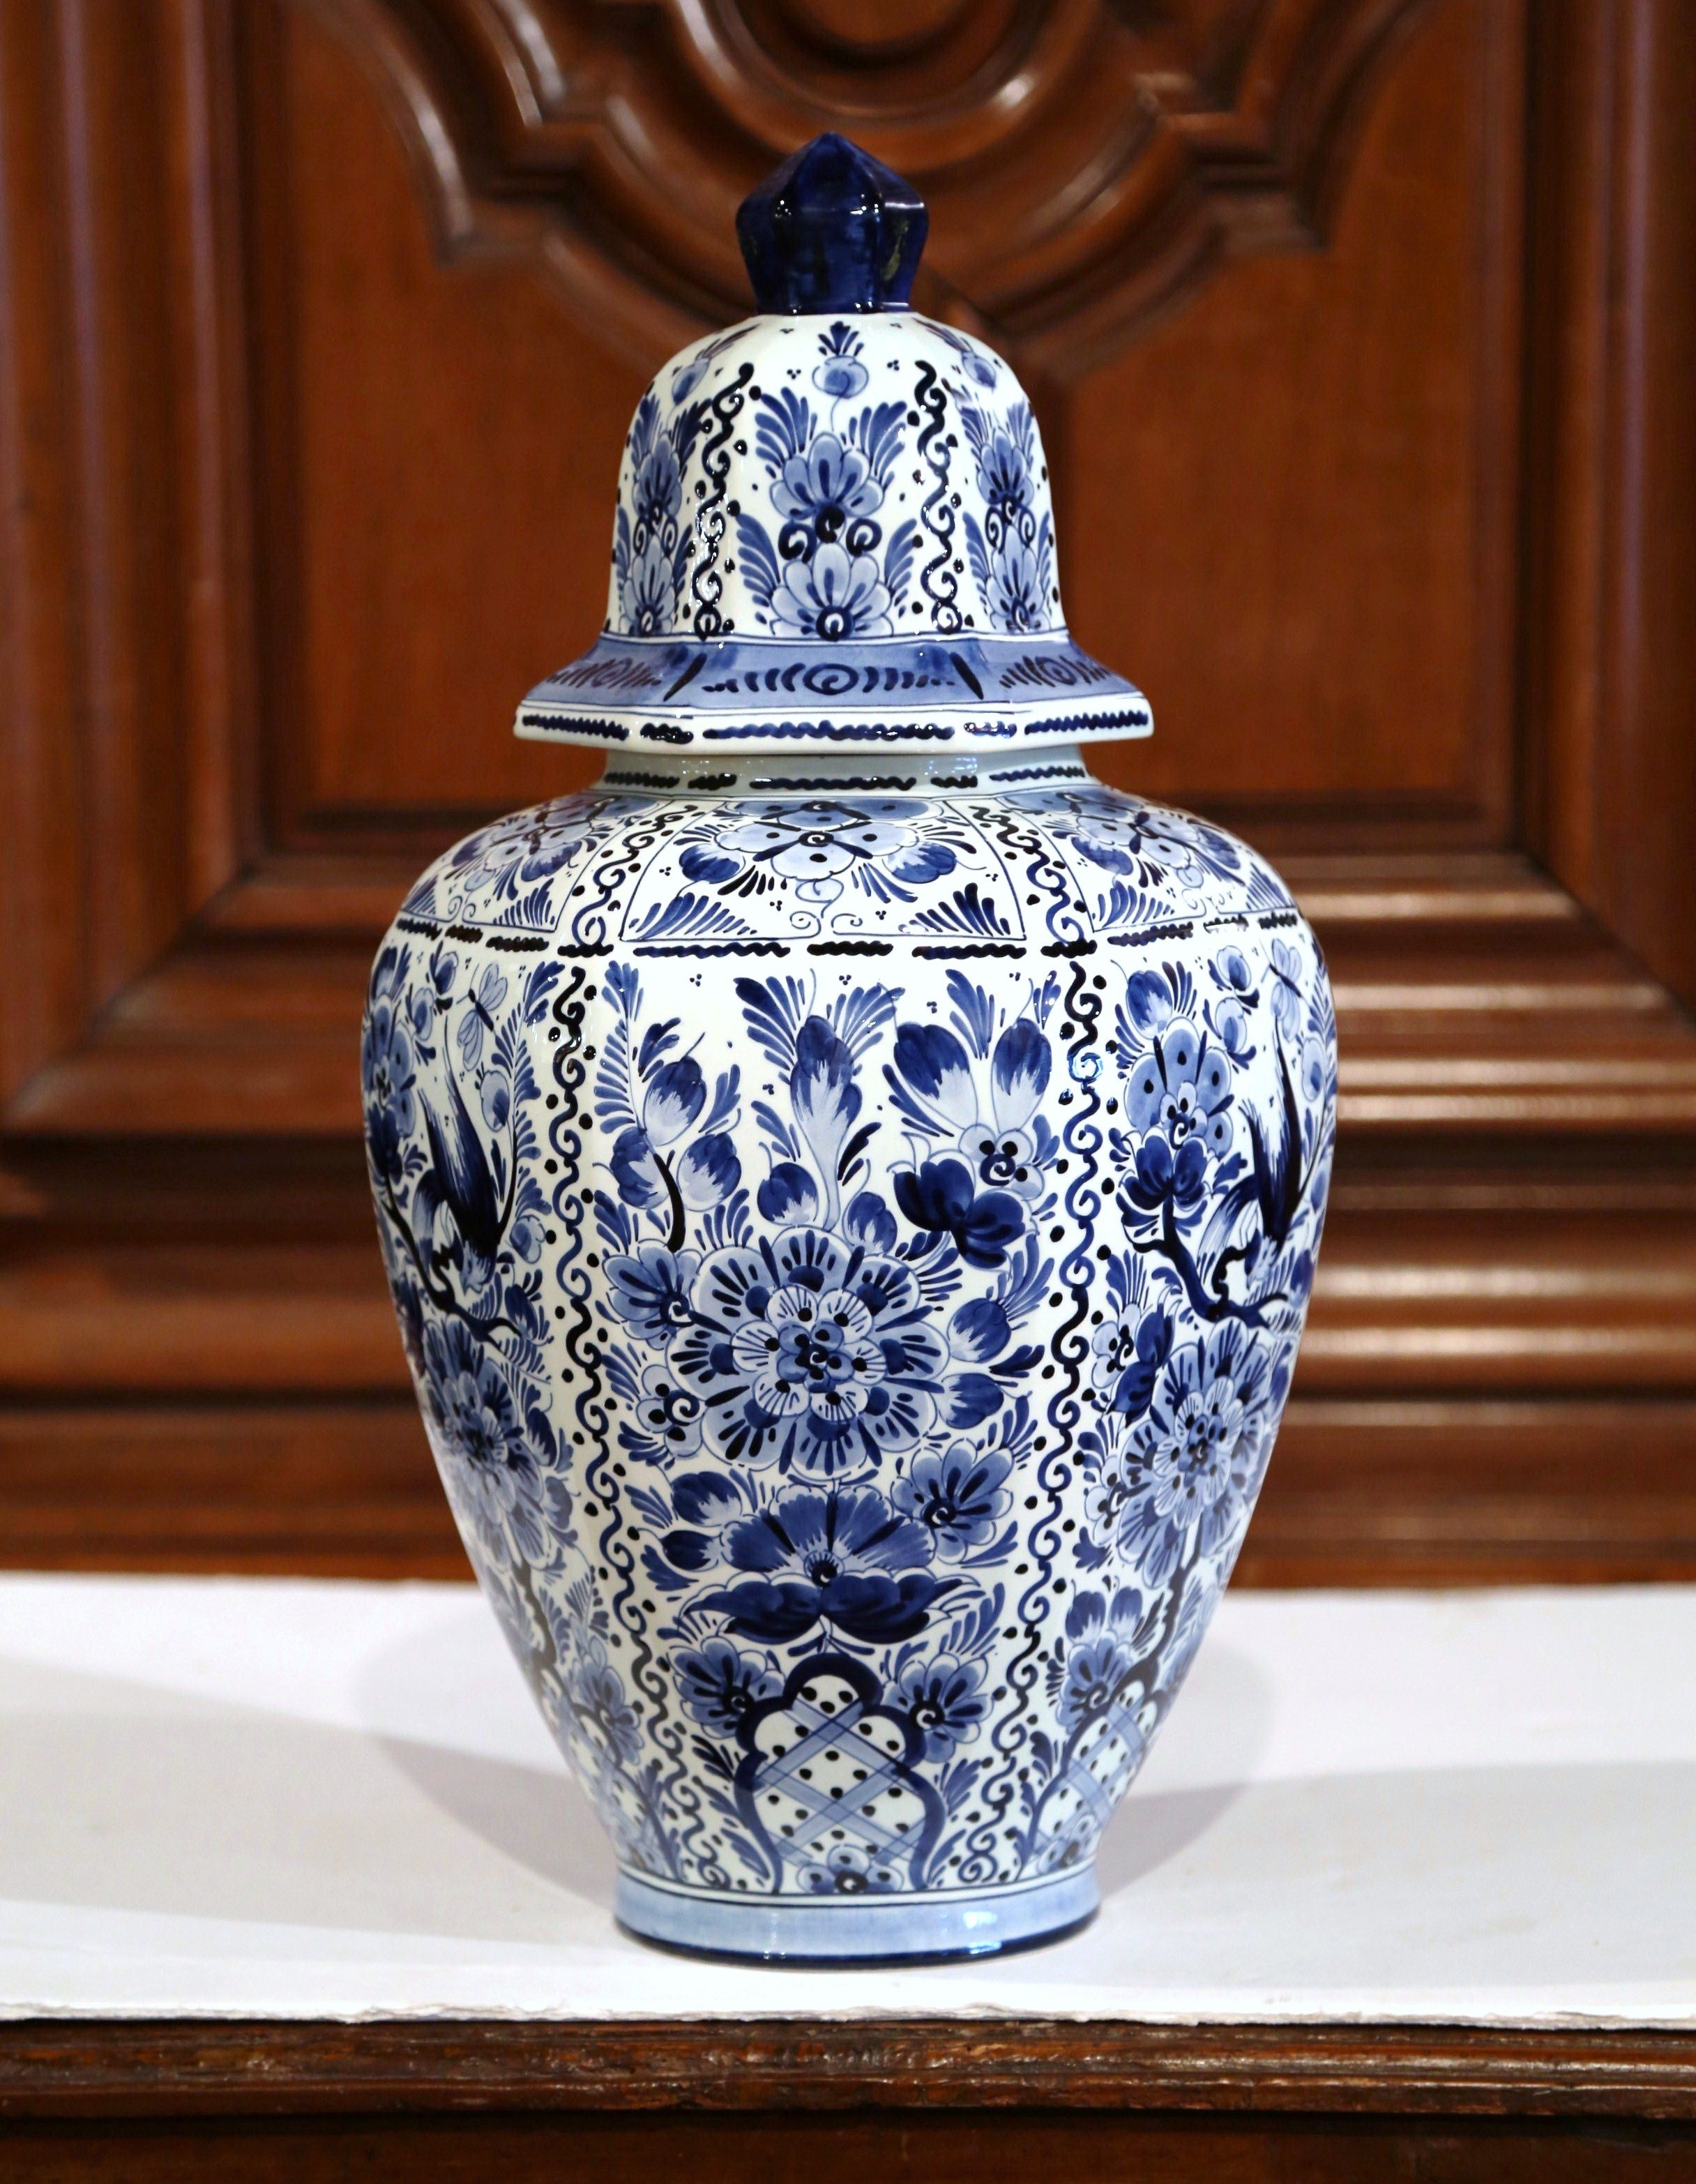 blue white ginger jar vases of large mid 20th century dutch blue and white faience delft ginger jar in large mid 20th century dutch blue and white faience delft ginger jar with top at 1stdibs